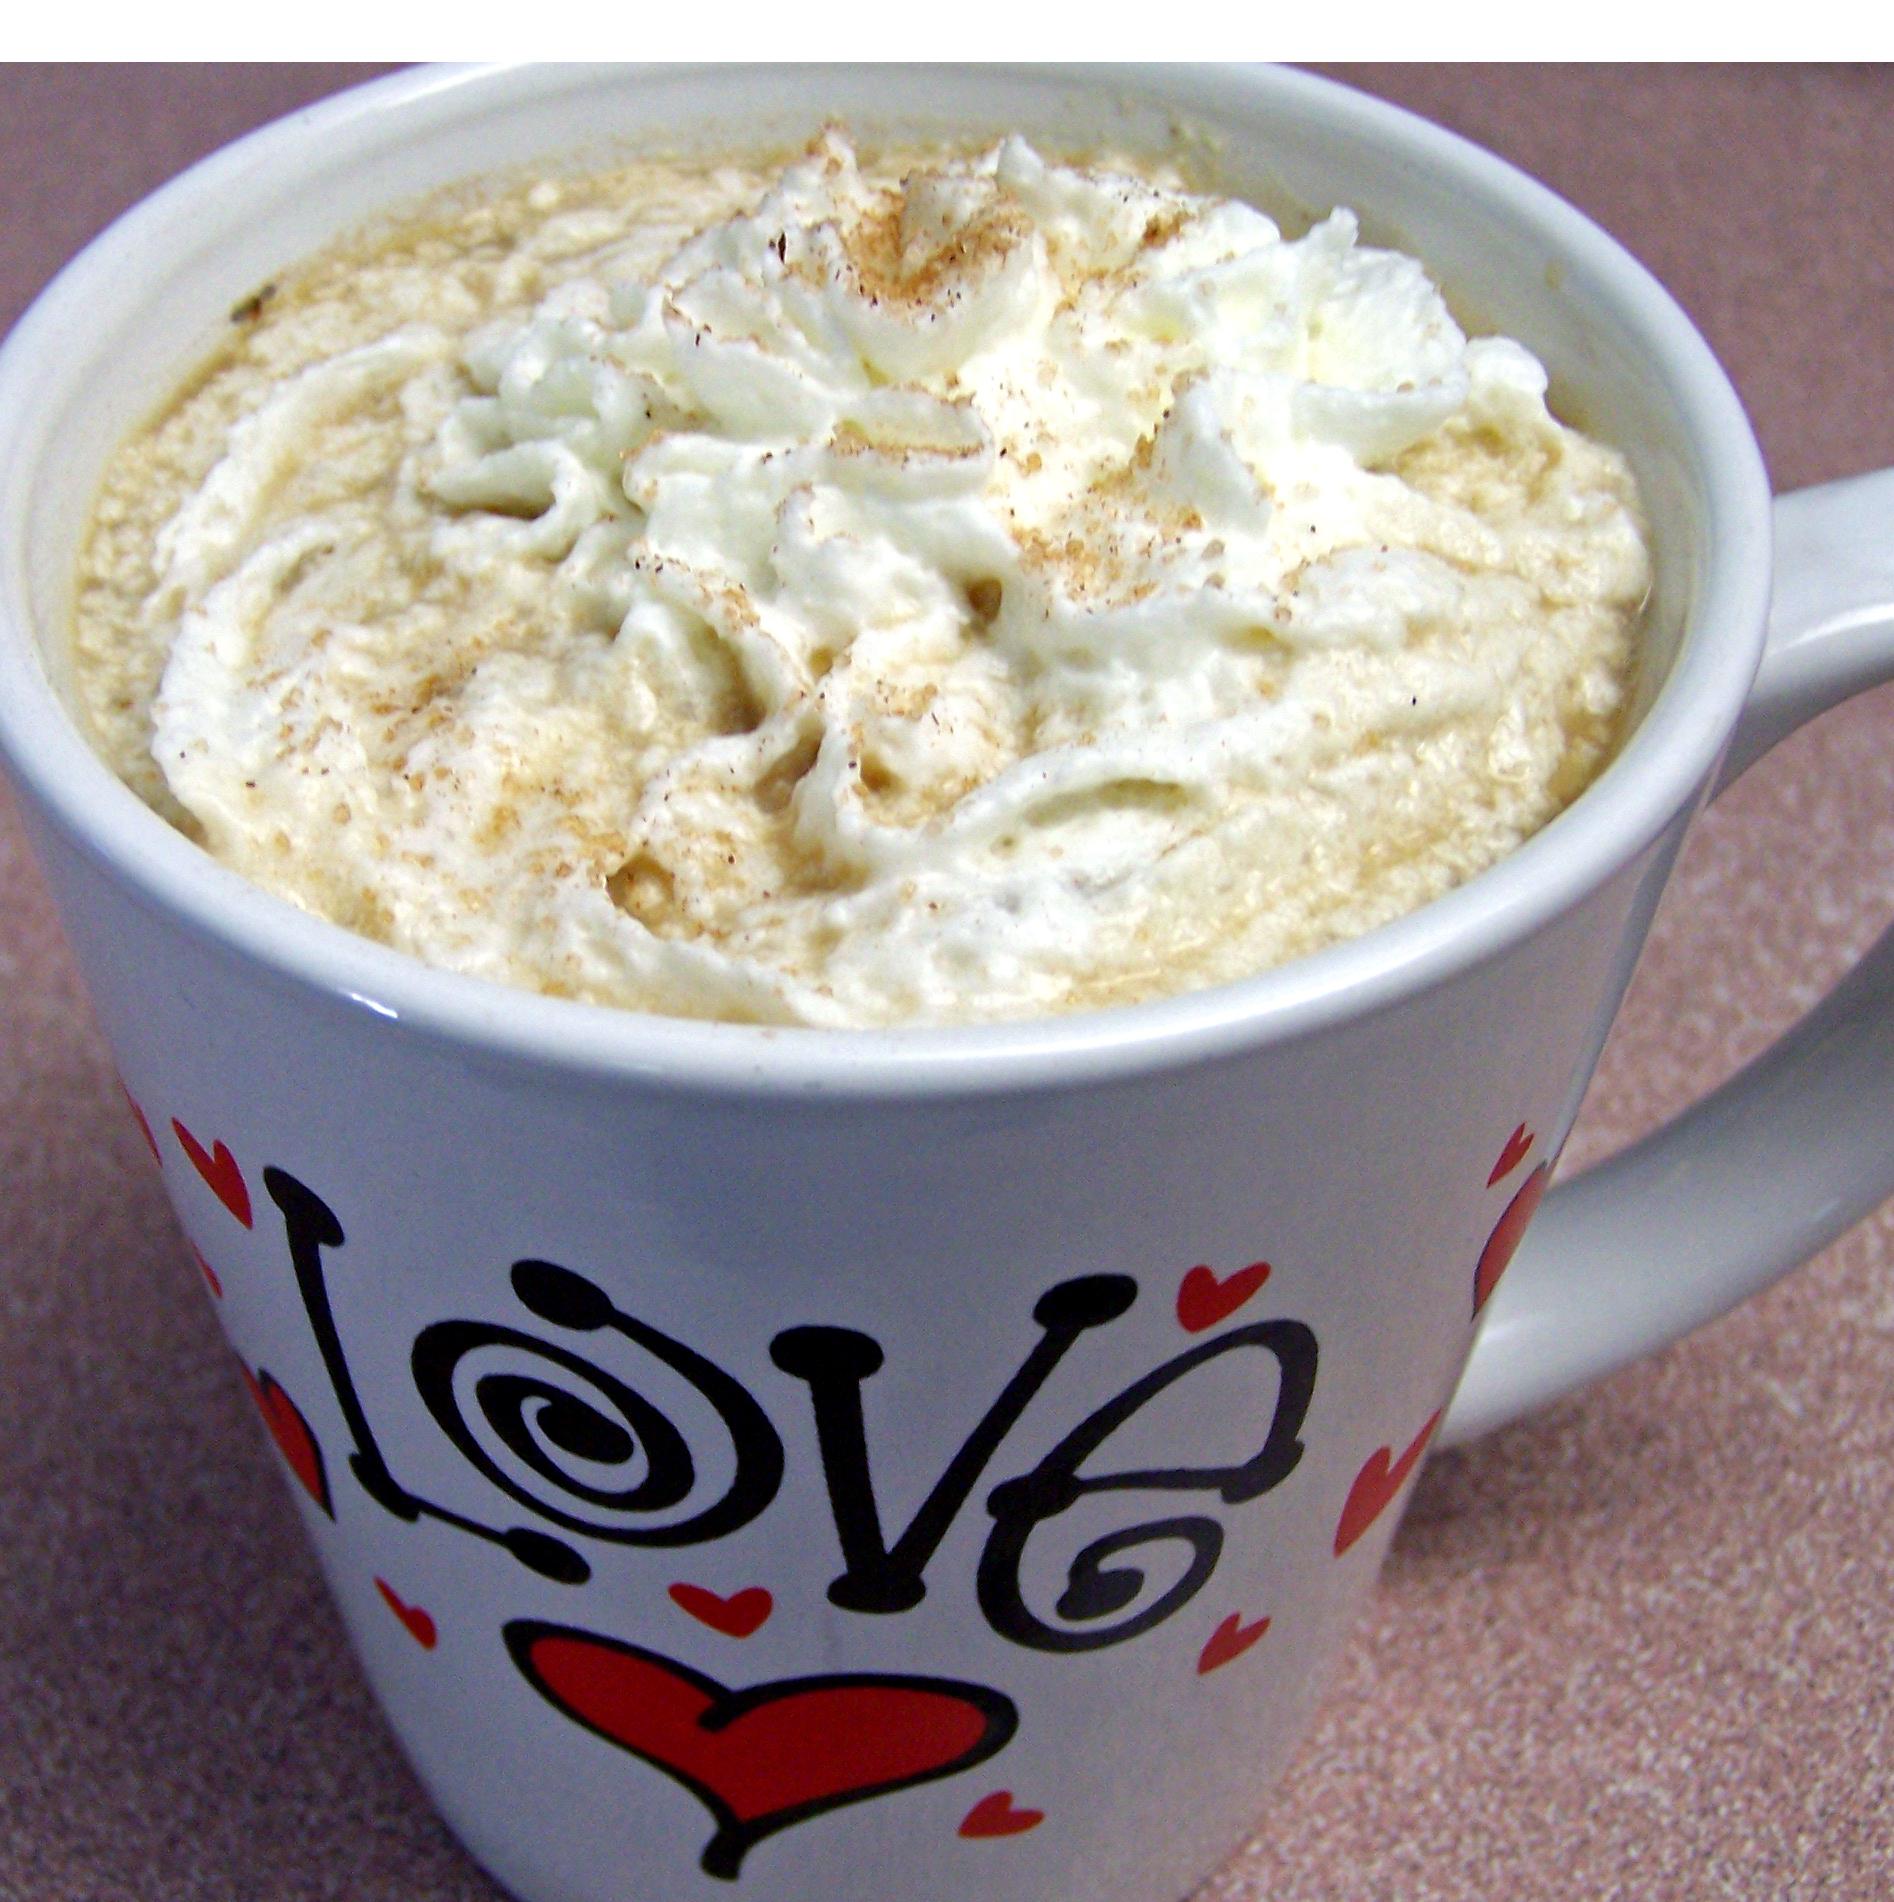  Treat yourself to this decadent, nutty and creamy coffee creation.